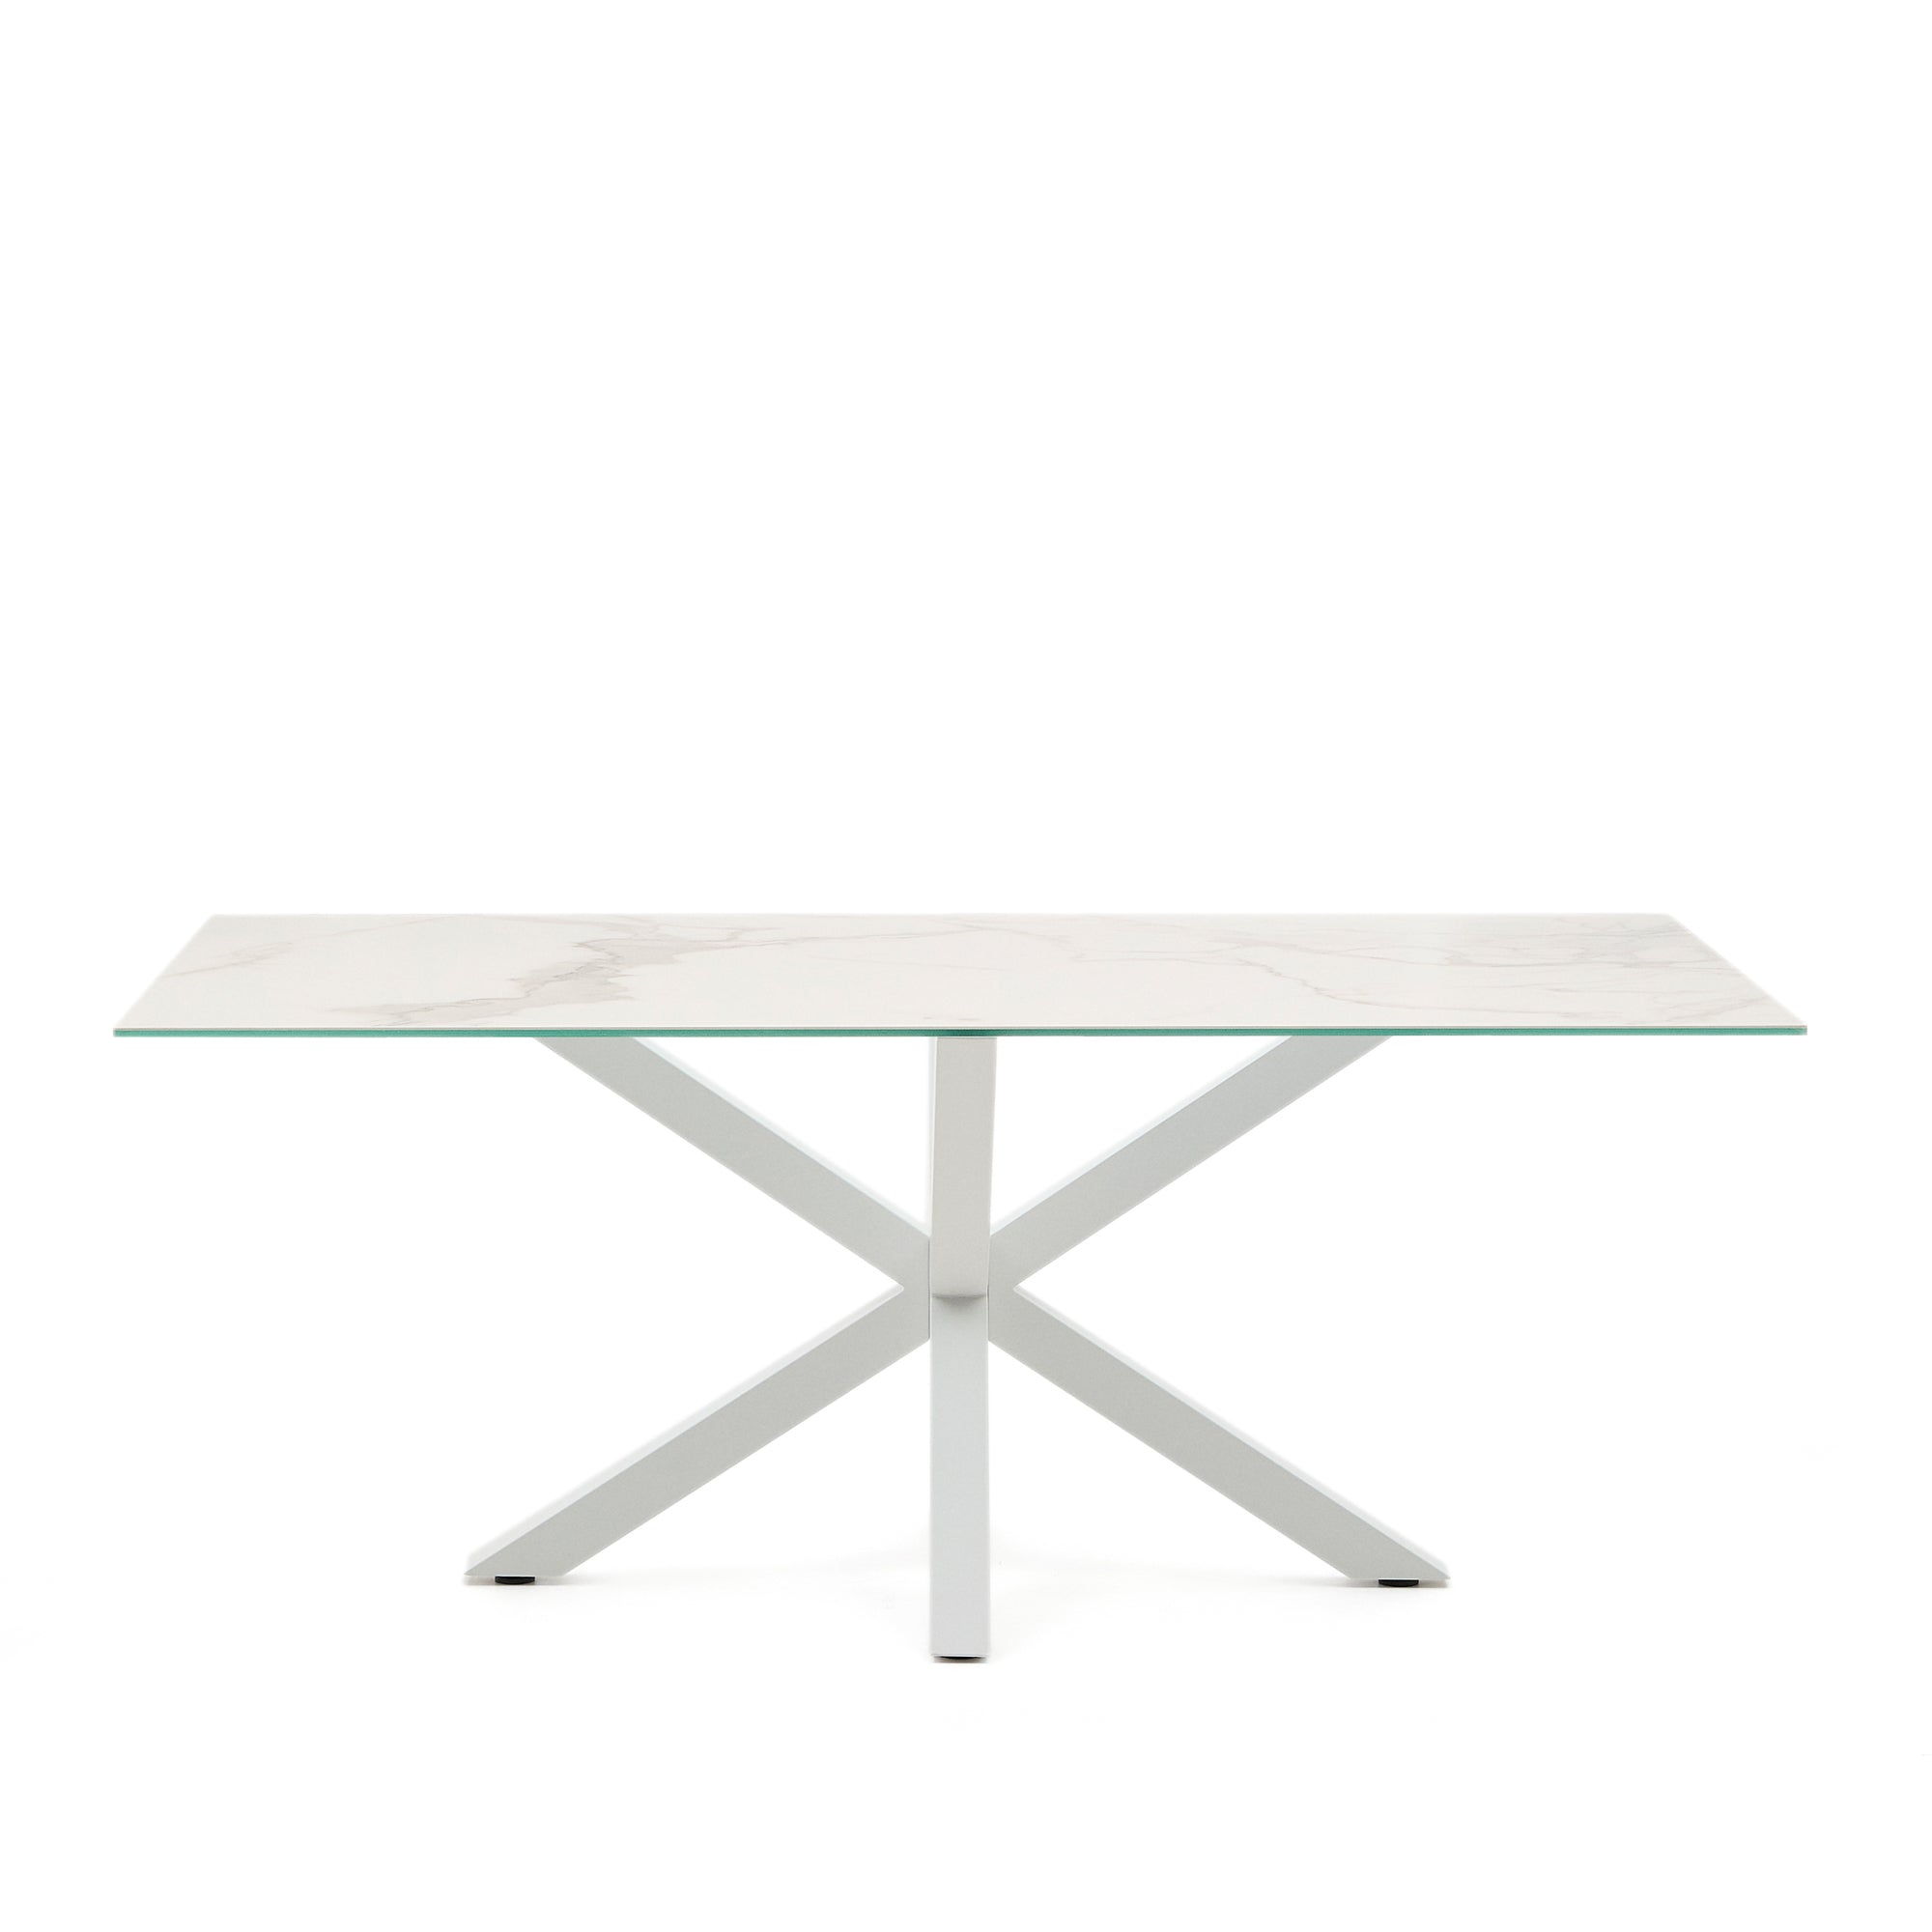 Argo table in white Kalos porcelain and steel legs with white finish, 200 x 100 cm